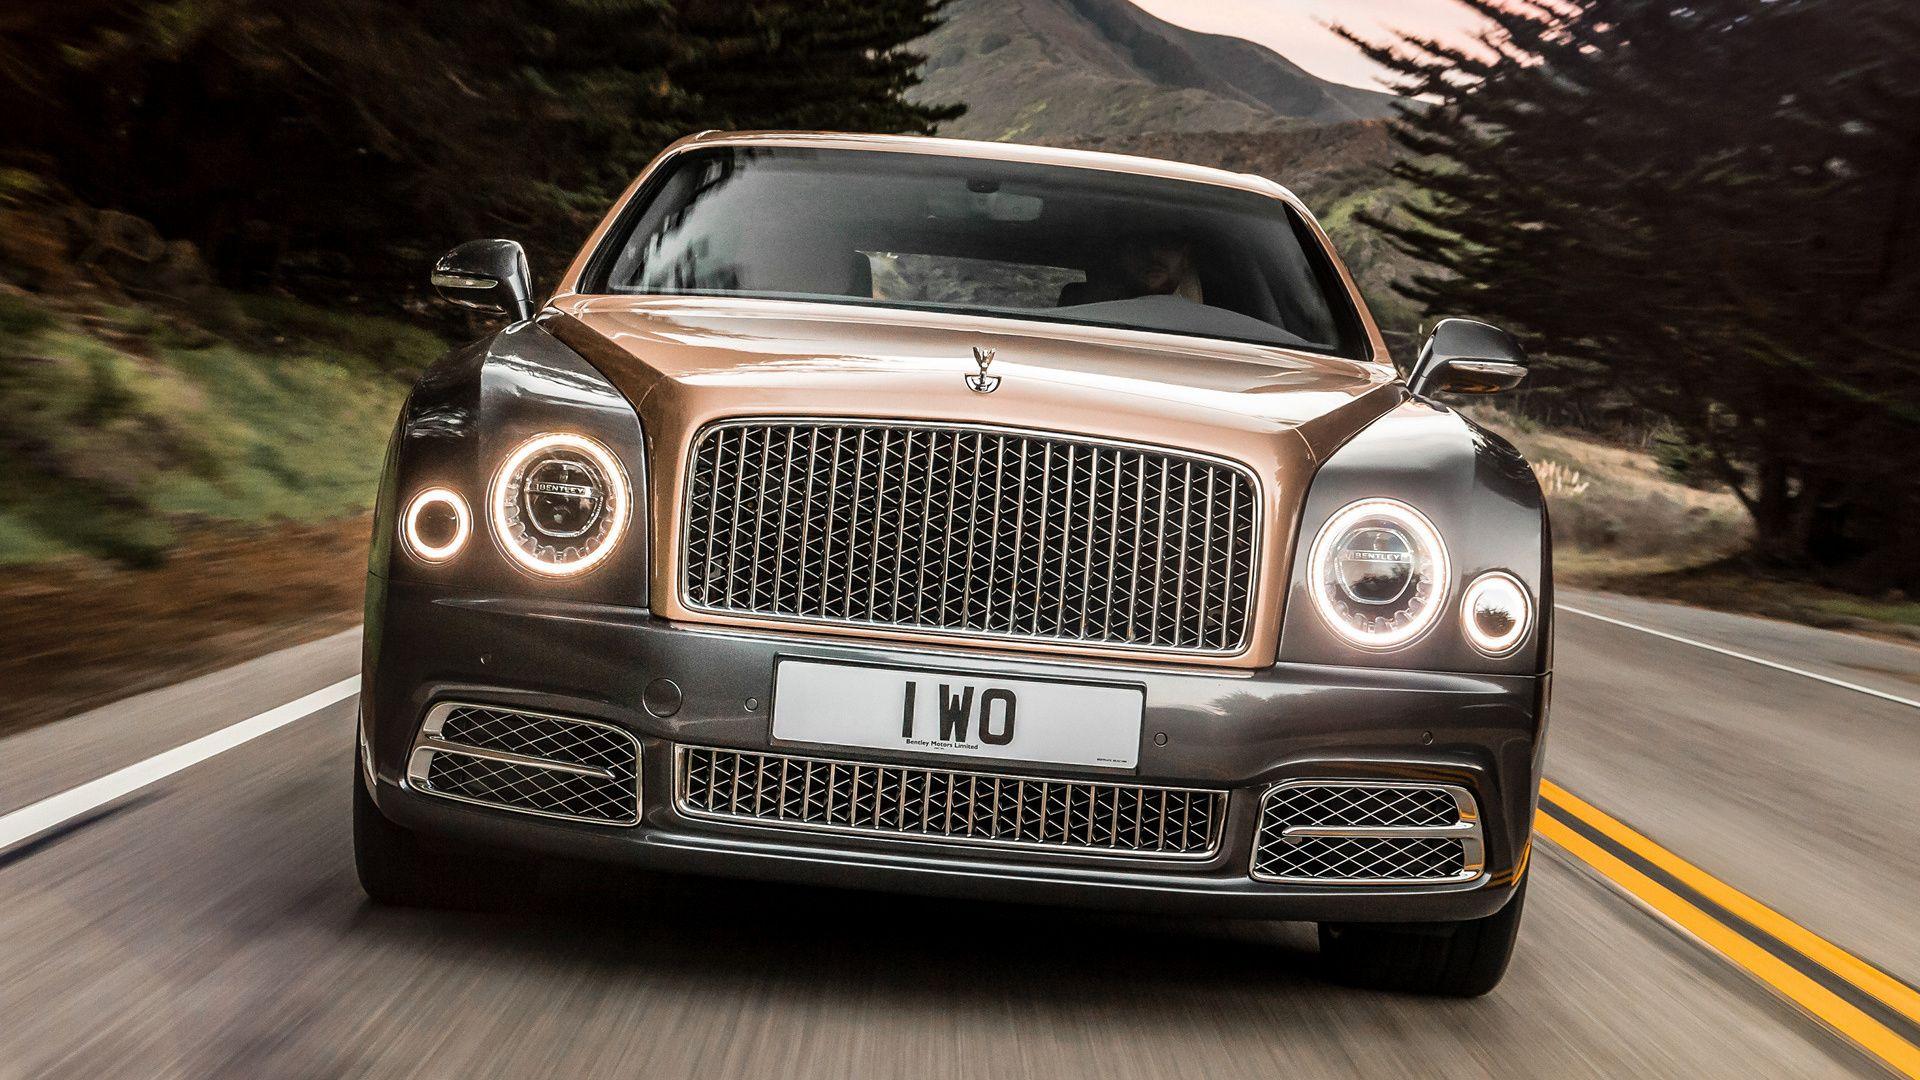 Bentley Mulsanne Extended Wheelbase and HD Image